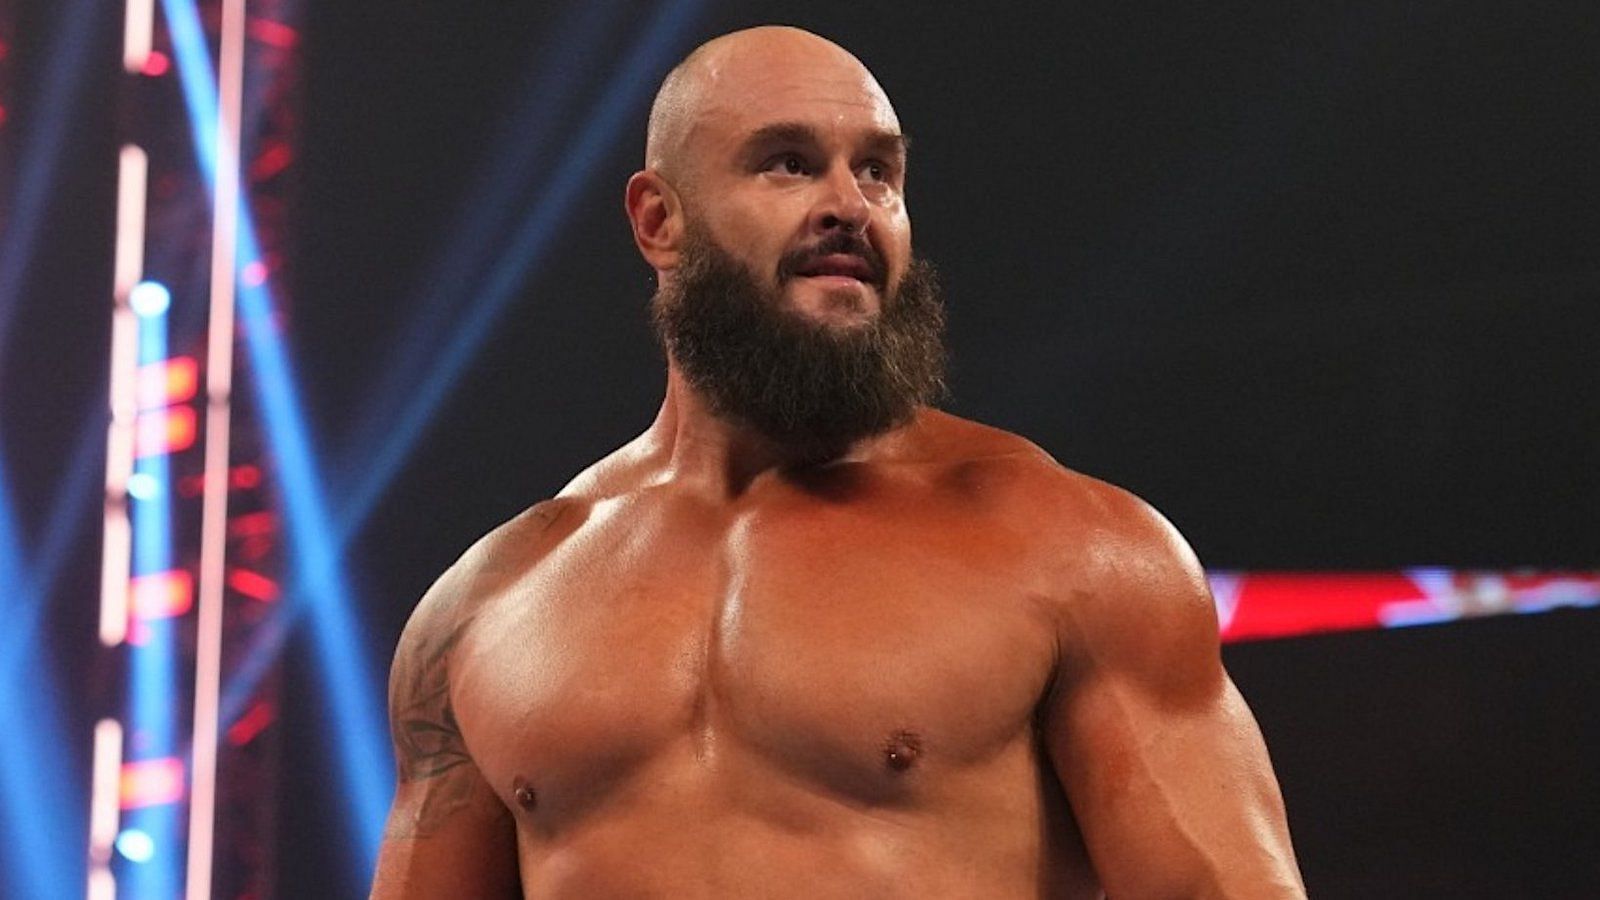 Strowman has recently been in matches for the tag team titles and Intercontinental Championship.